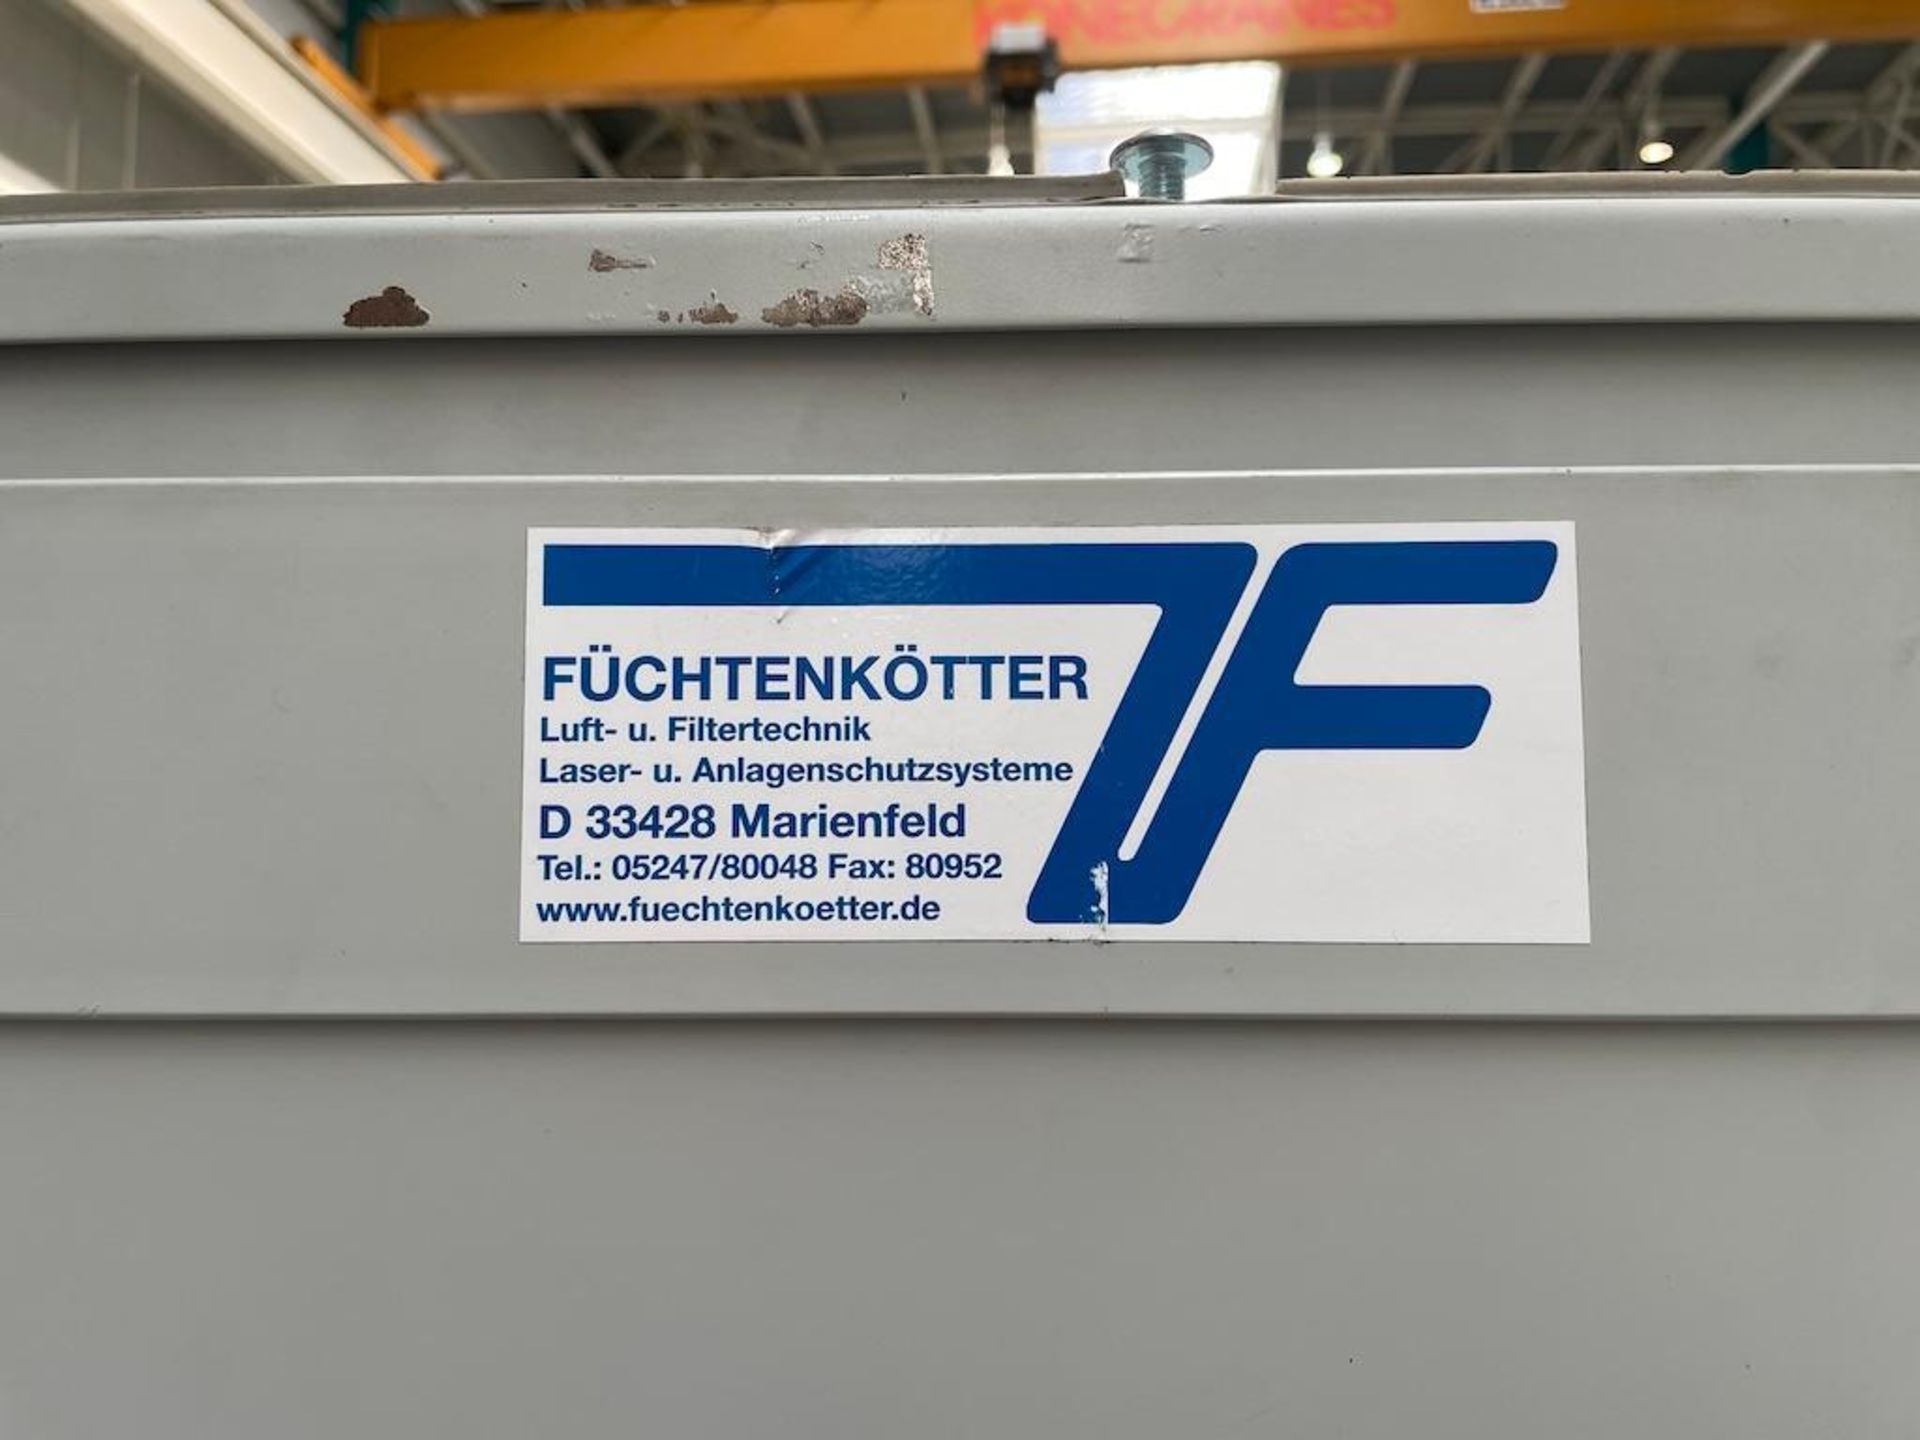 FUCHTENKOTTER LASER INSPECTION STATION, 4 FT TRAY CAPACITY [102] [MATANE] *PLEASE NOTE, EXCLUSIVE RI